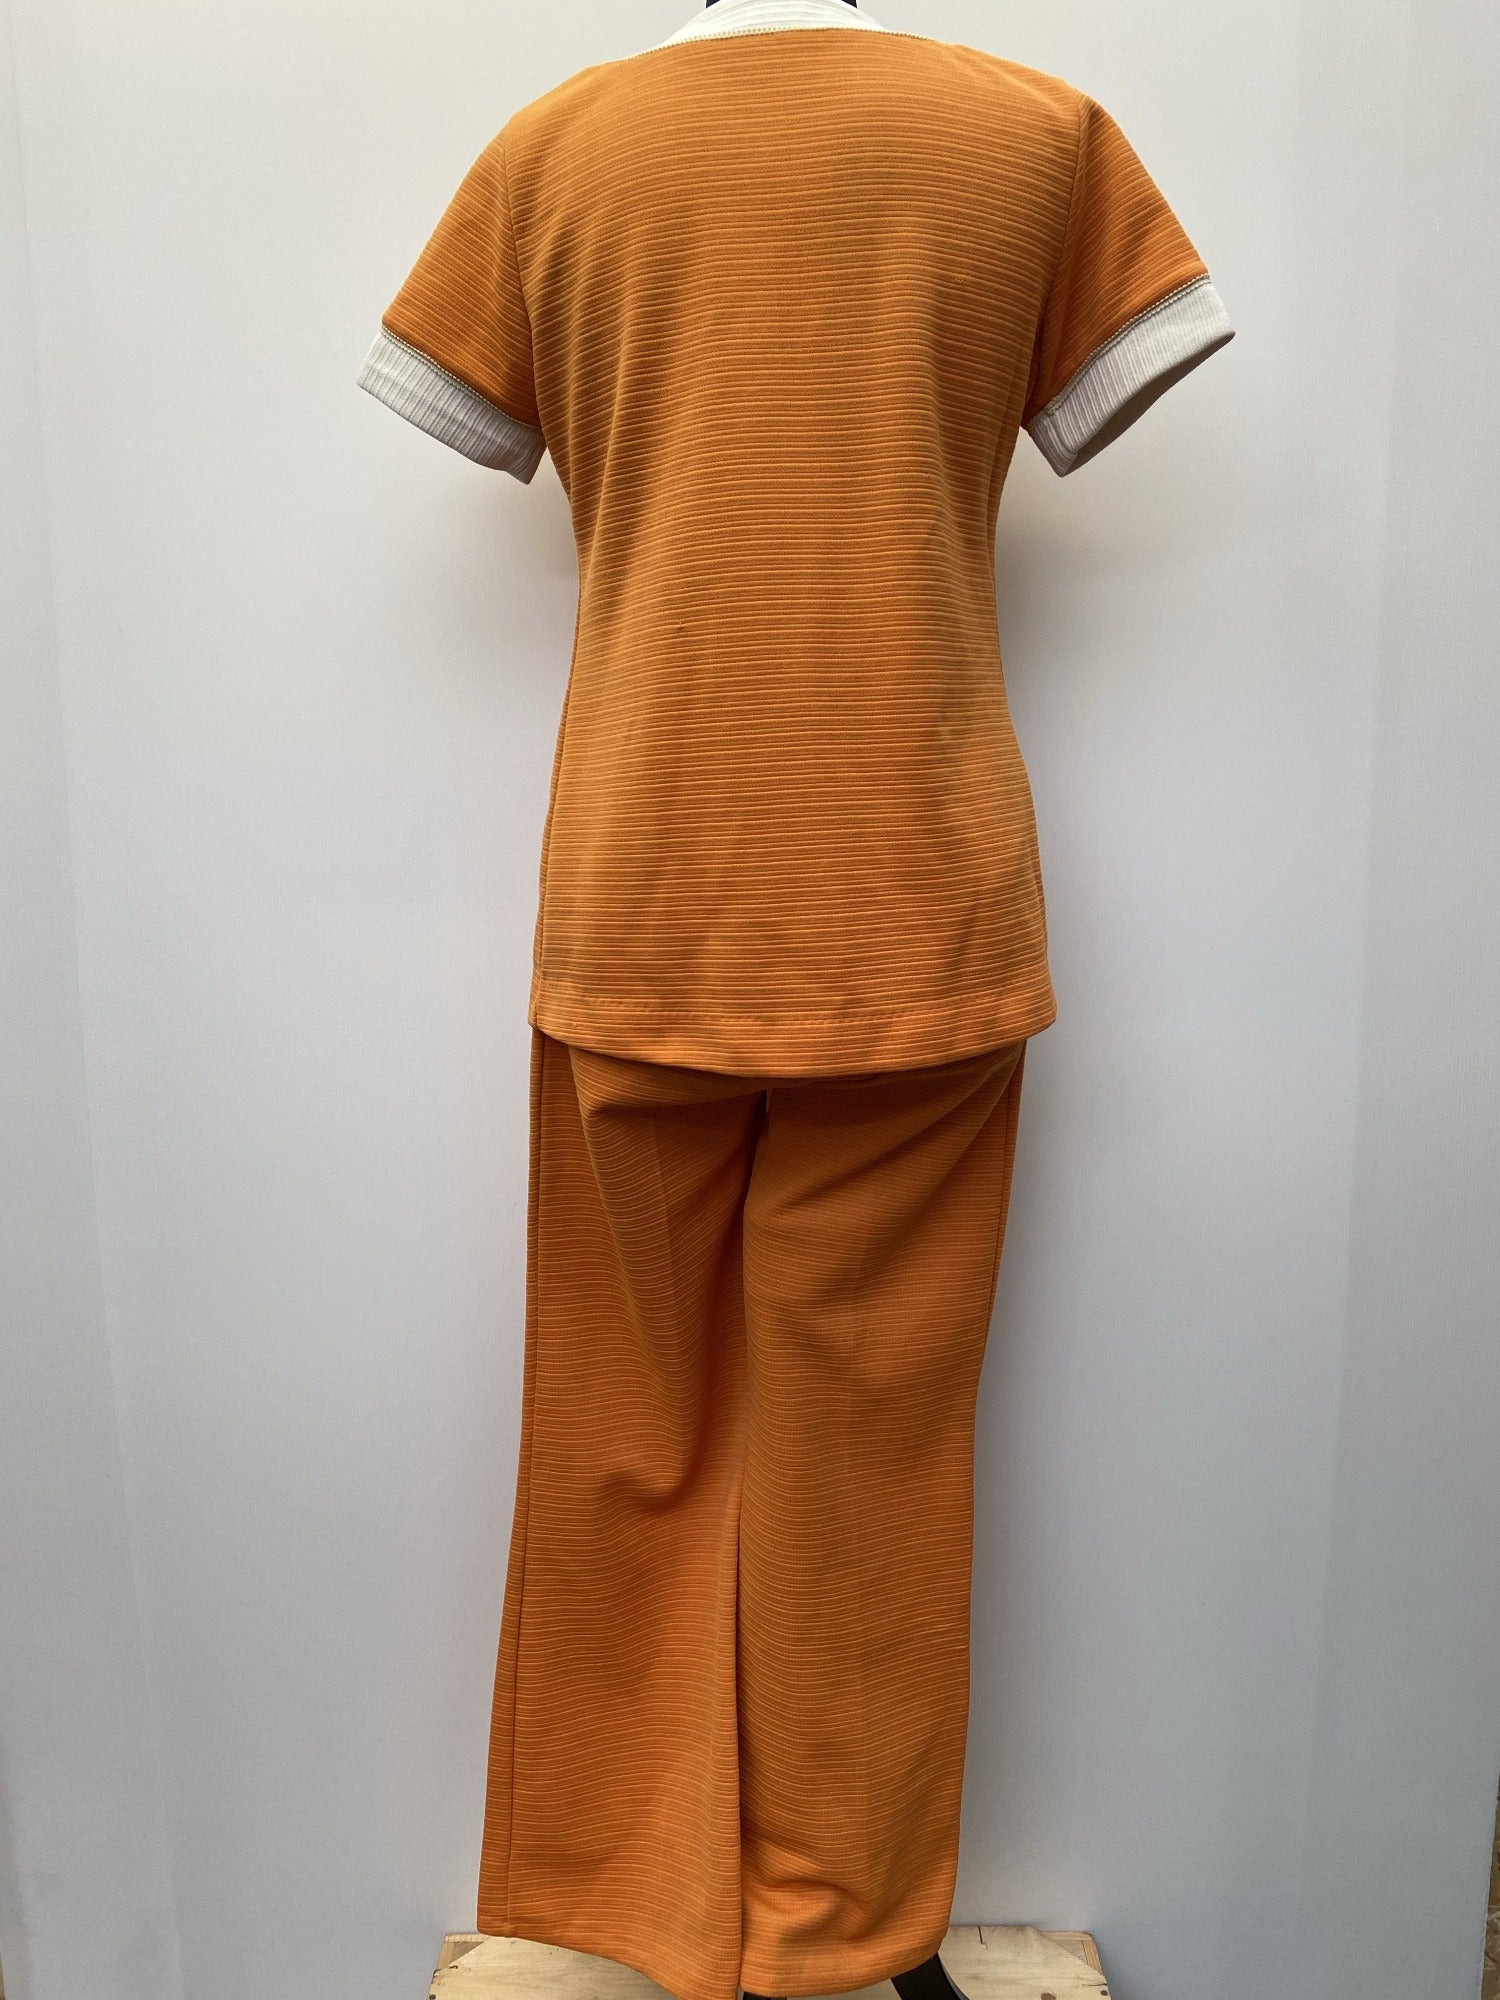 vintage 60s 1960s mod suit set trousers flared wide leg top tunic short sleeved orange white rare urban village womens clothing